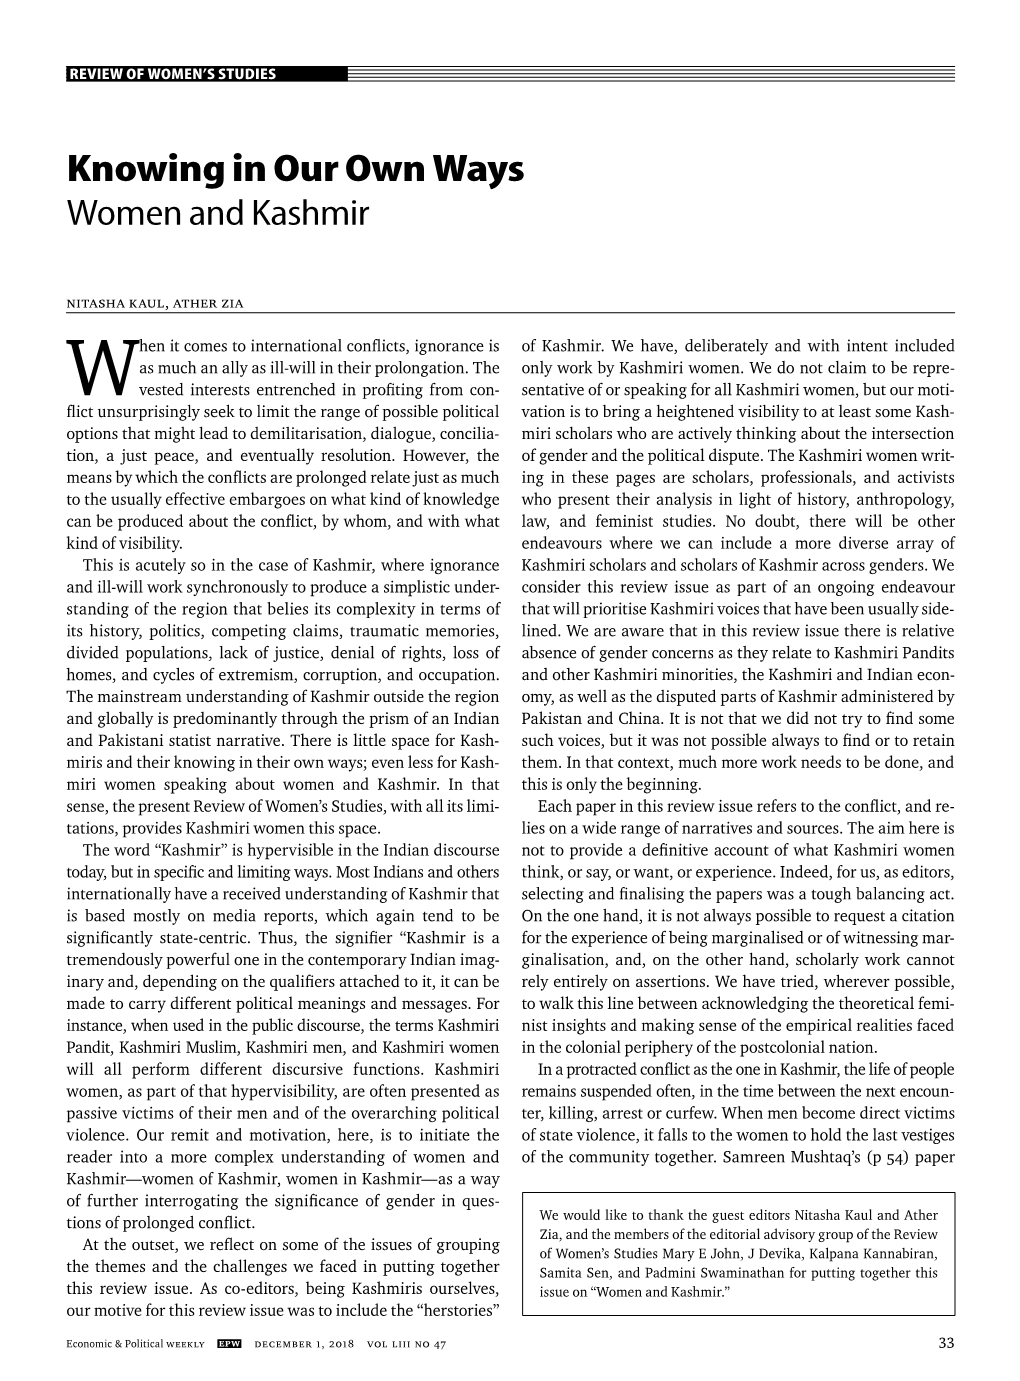 Knowing in Our Own Ways Women and Kashmir